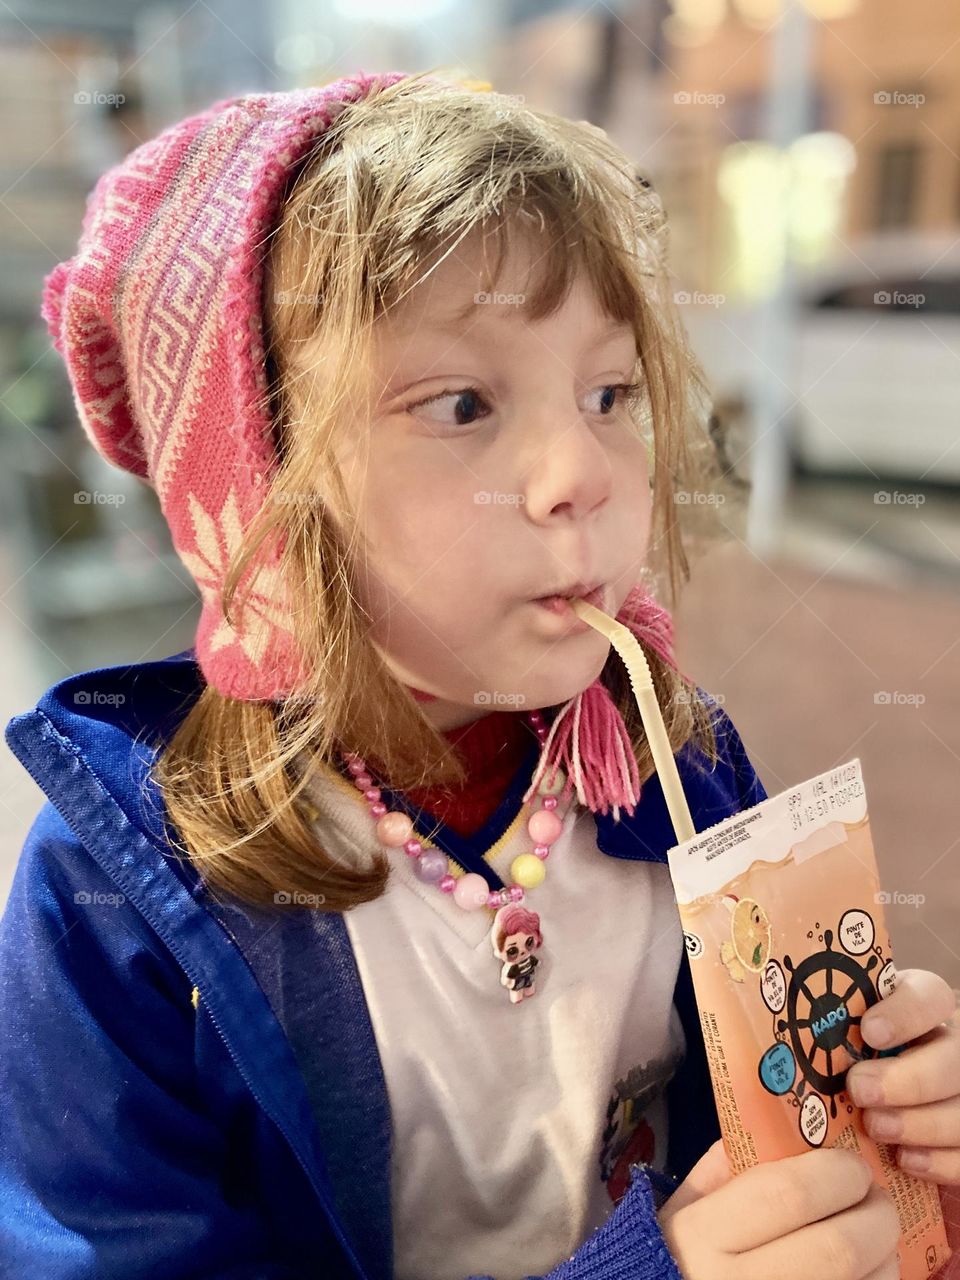 🇺🇸 A snapshot of everyday life.  Without her realizing it, I photographed my little daughter Estela drinking juice and very concentrated… what would she be thinking? / 🇧🇷 Sem ela perceber, fotografei minha Estela tomando suco… o que estaria pensando?